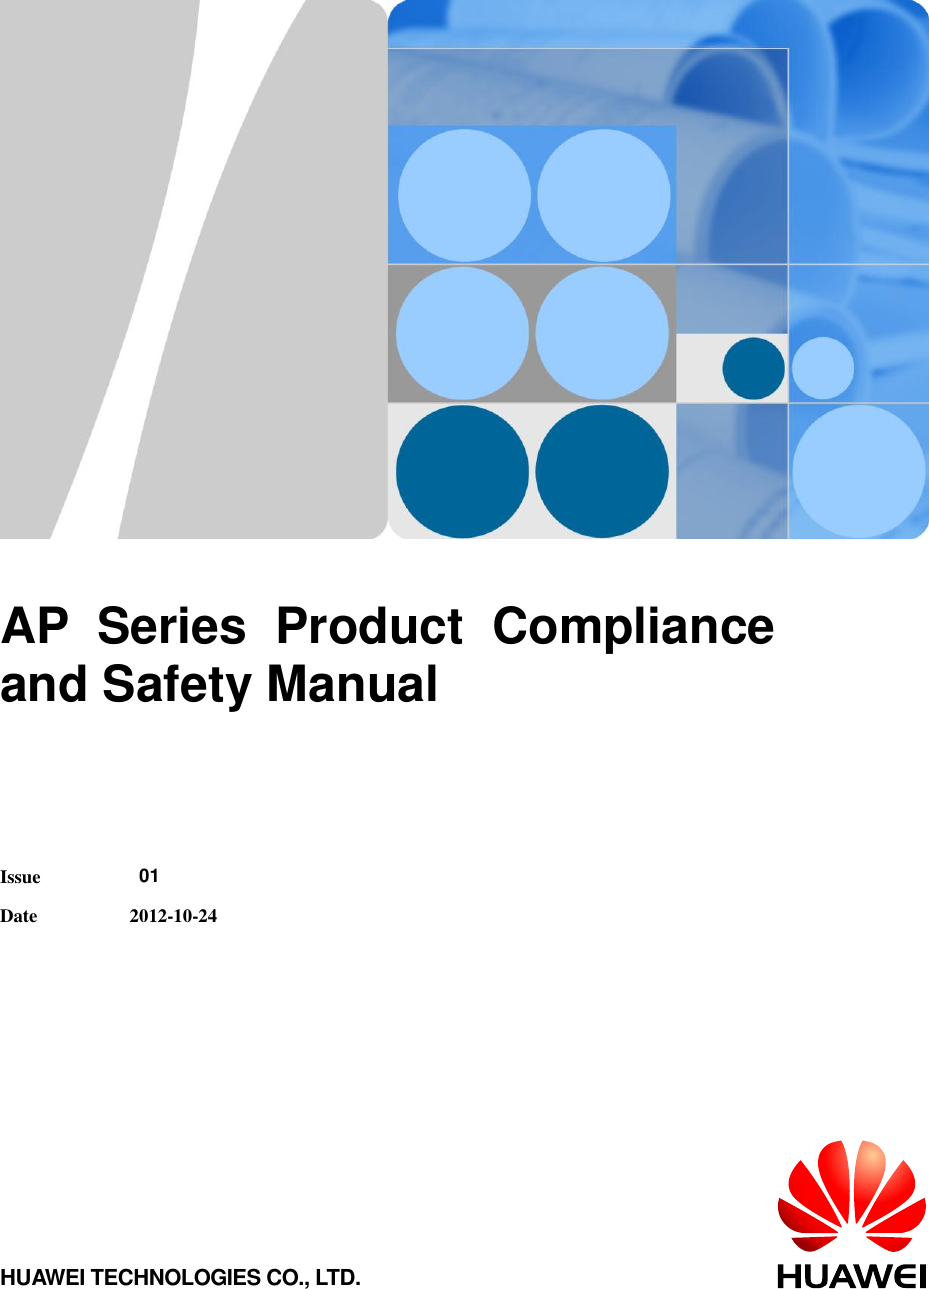         AP  Series  Product  Compliance and Safety Manual   Issue  01 Date 2012-10-24 HUAWEI TECHNOLOGIES CO., LTD. 